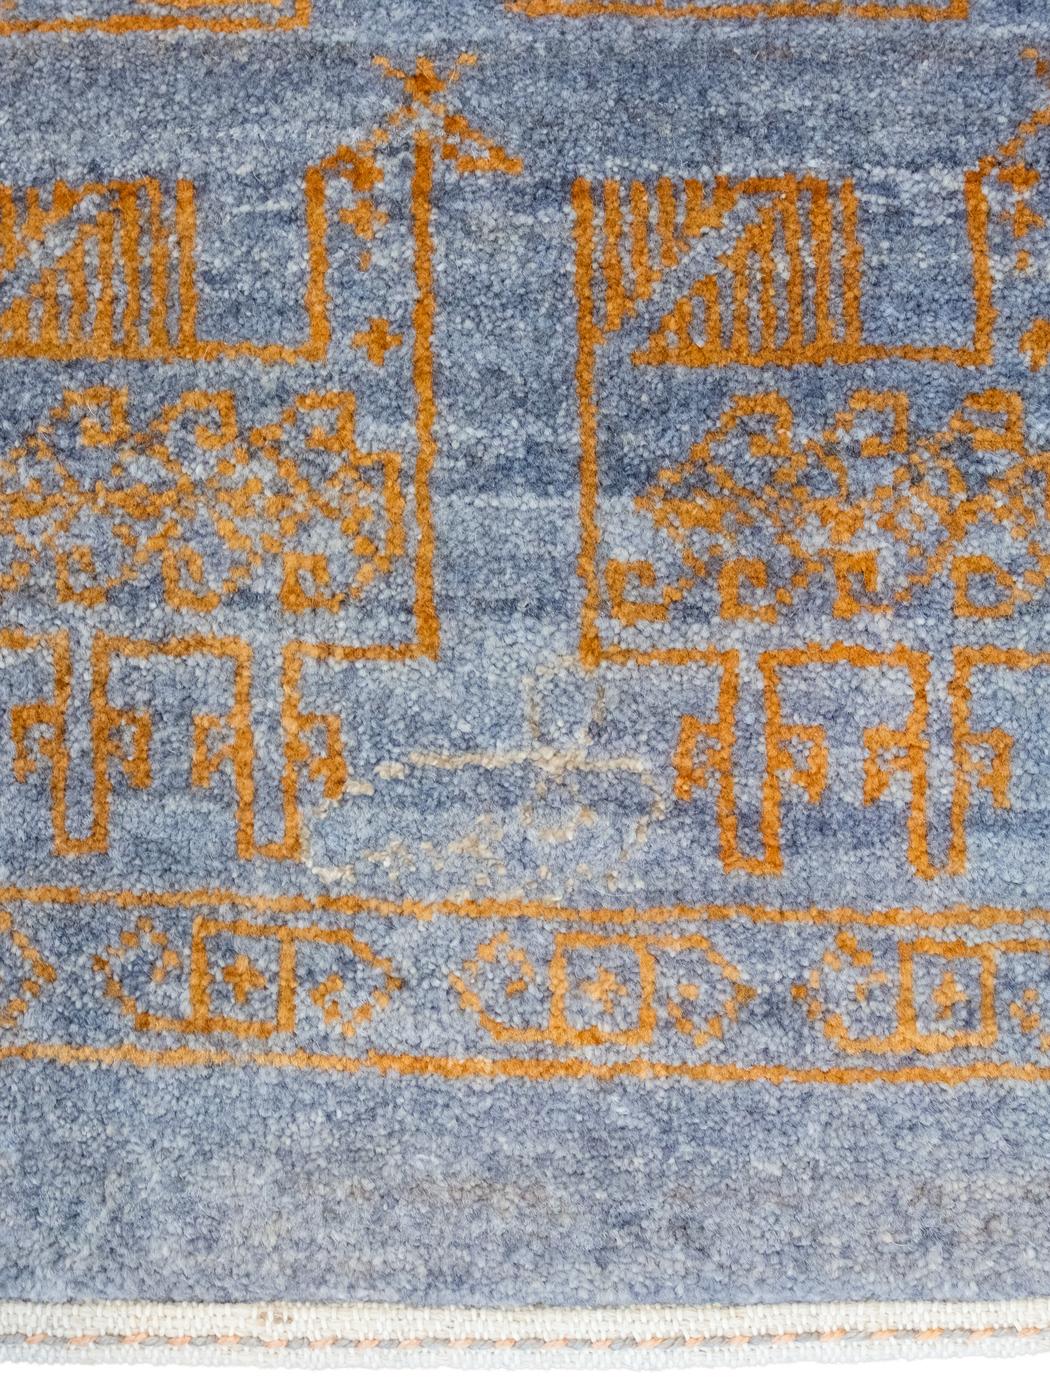 Hand-Knotted Orley Shabahang, Orange and Gray Contemporary Peacock Carpet, Wool, 9' x 12' For Sale